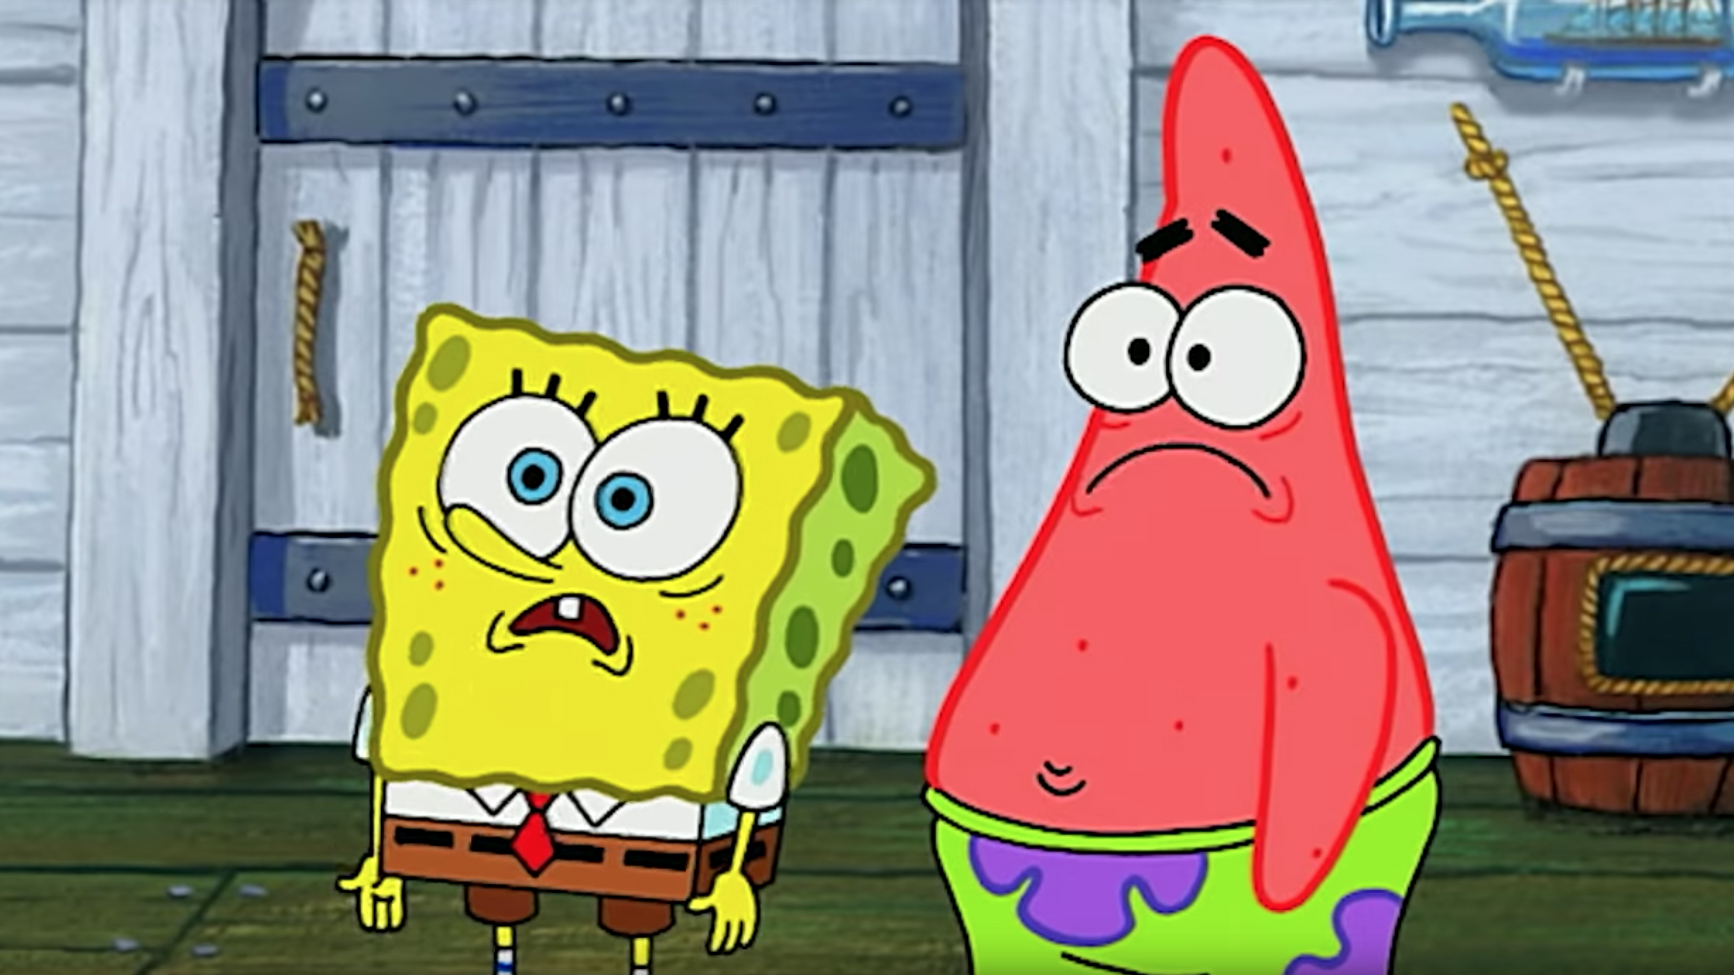 Inappropriate SpongeBob episodes get pulled by streaming services